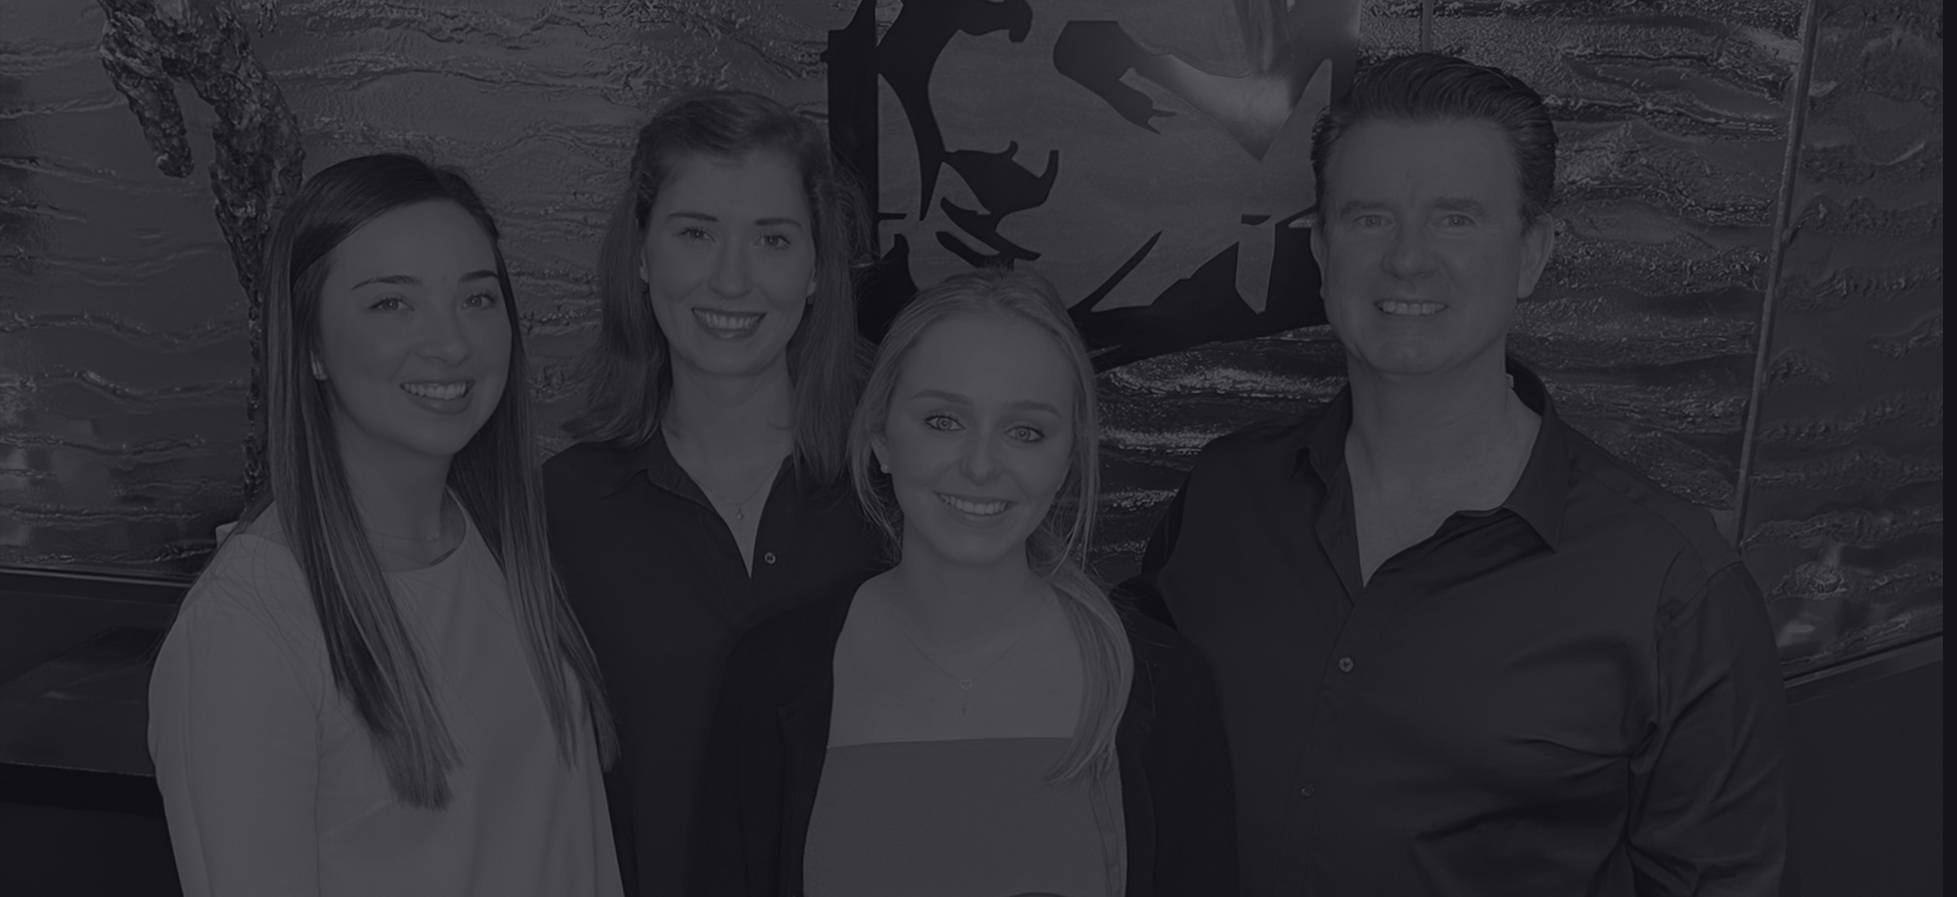 Meet the dedicated team at Wynyard Chiro: Dr John de Voy, Dr Aimee Mason, and Practice Manager Christina Votaw. Our passionate team is committed to providing exceptional chiropractic care and ensuring your well-being.